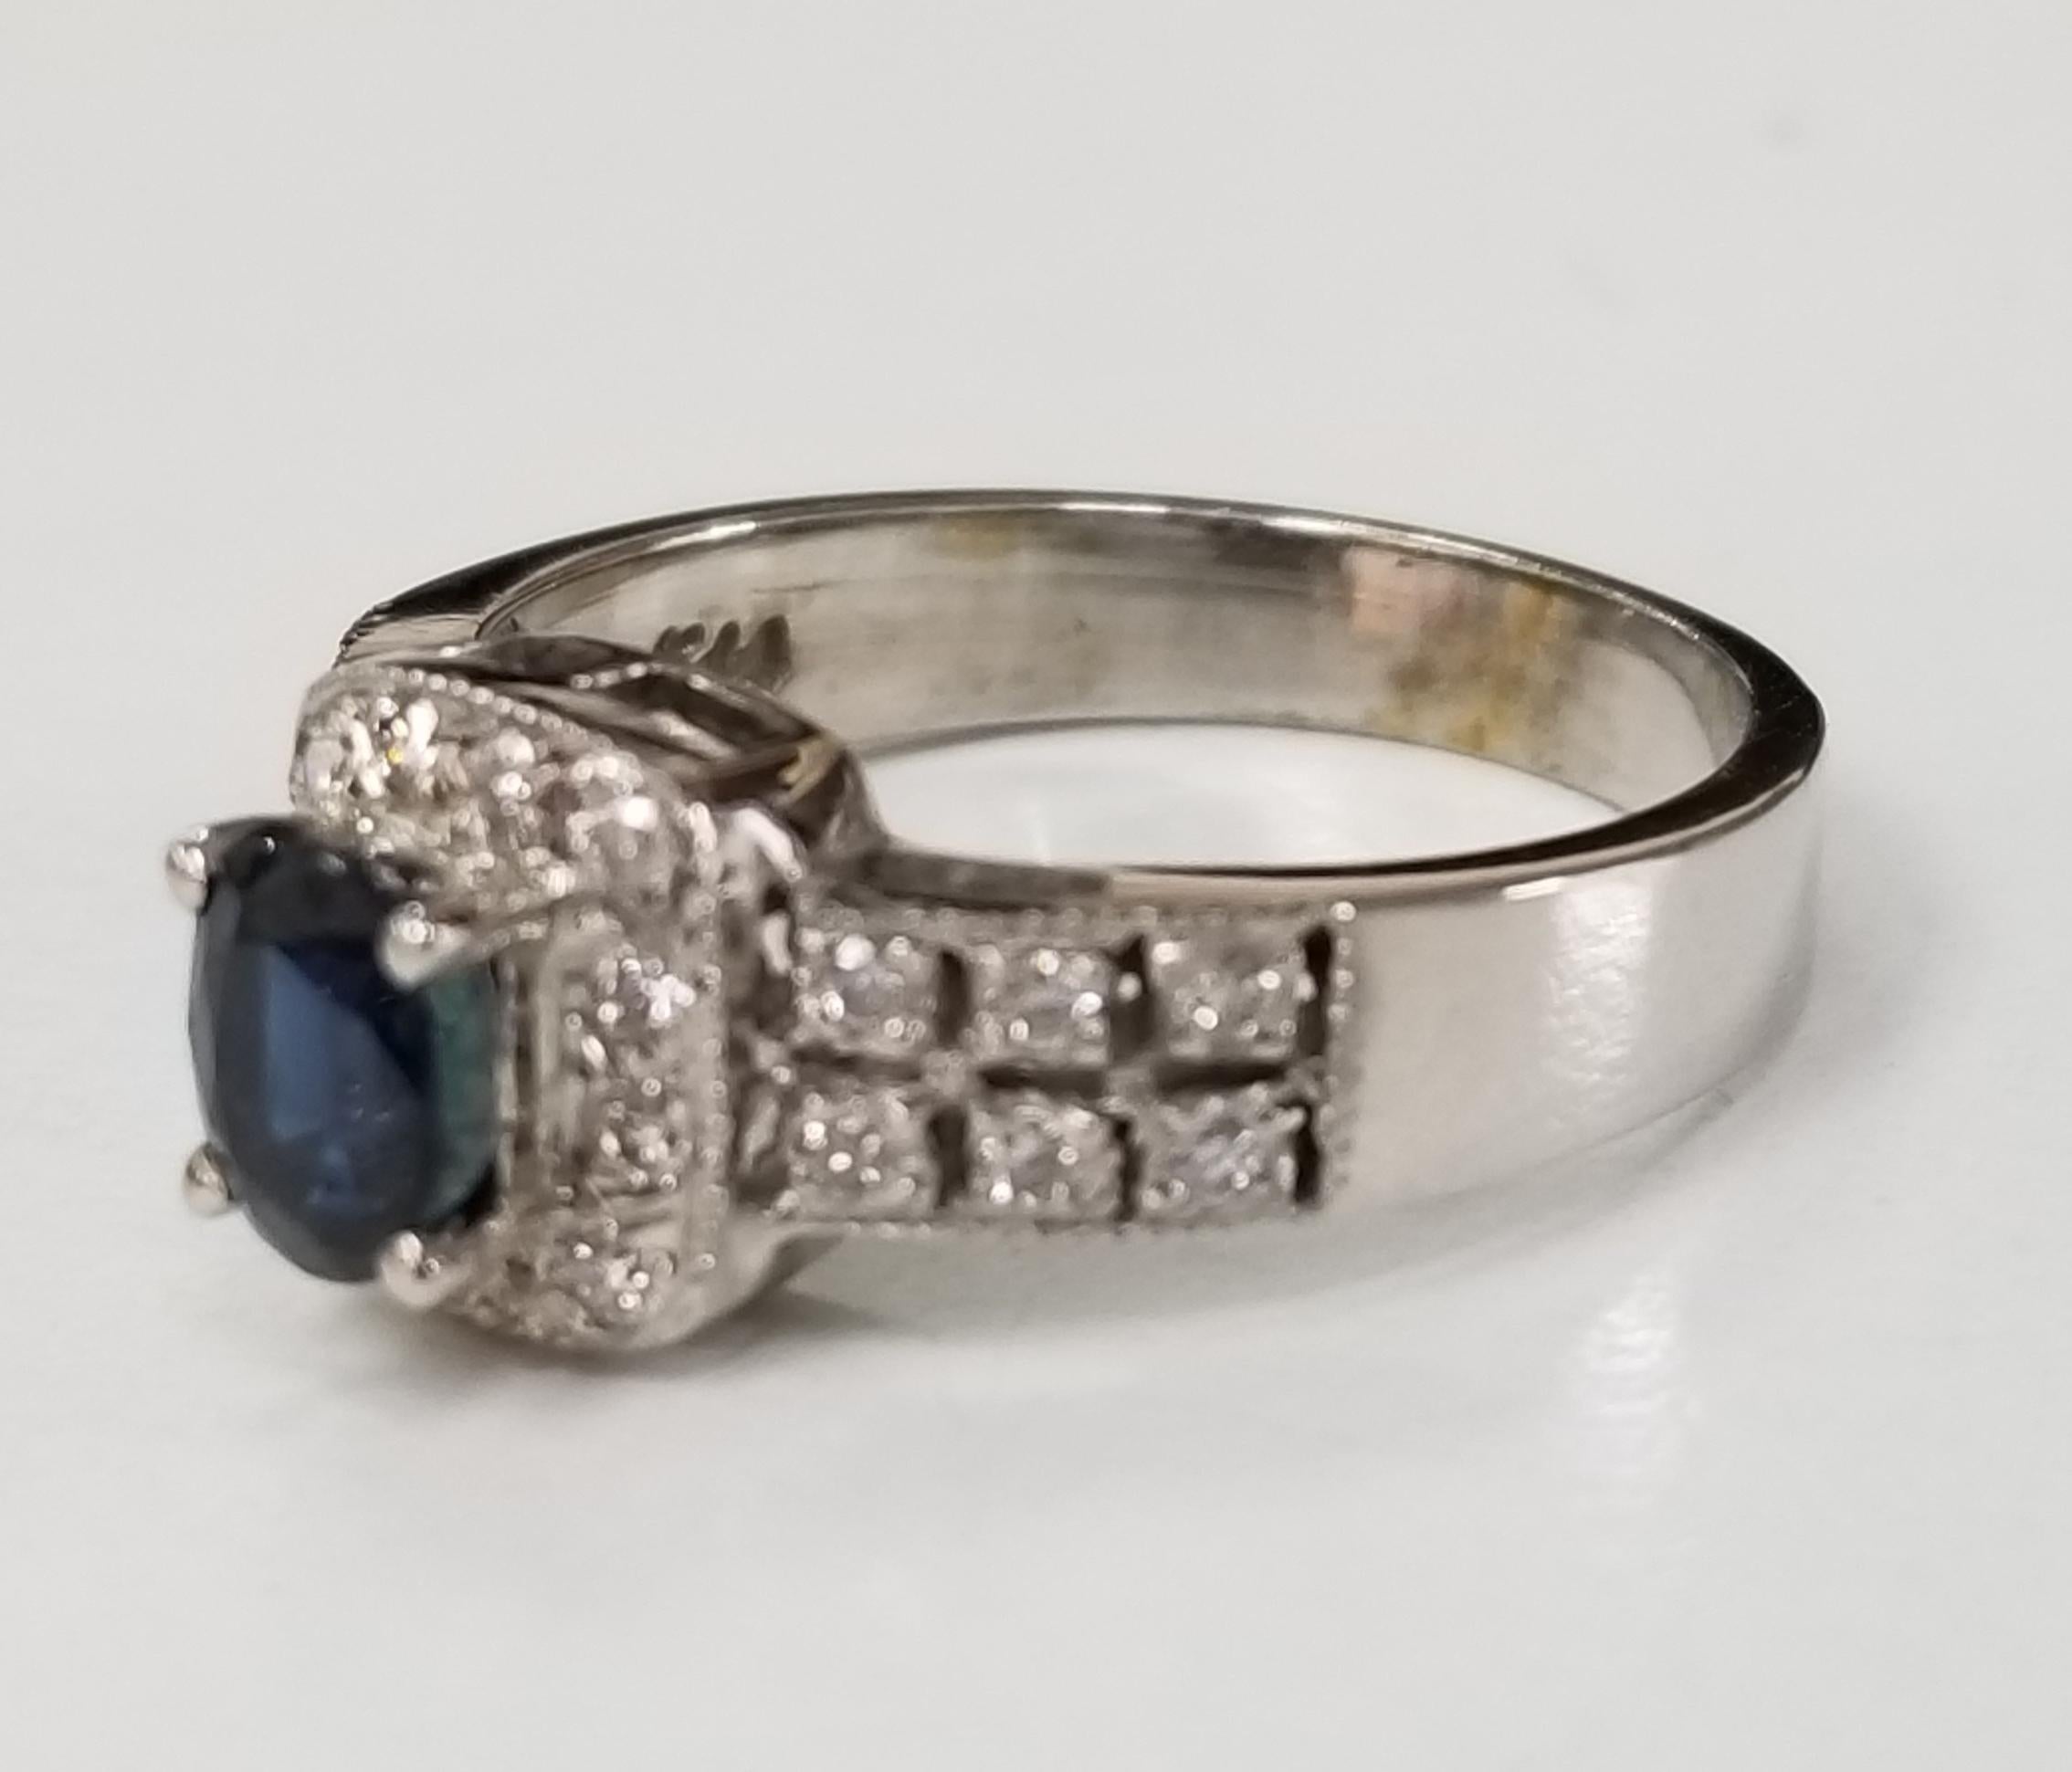 14k white gold sapphire and diamond ring containing 1 oval sapphire weighing .80pts. and 26 round full cut diamonds weighing .25pts.  This ring is a size 6 but we will size to fit for free.